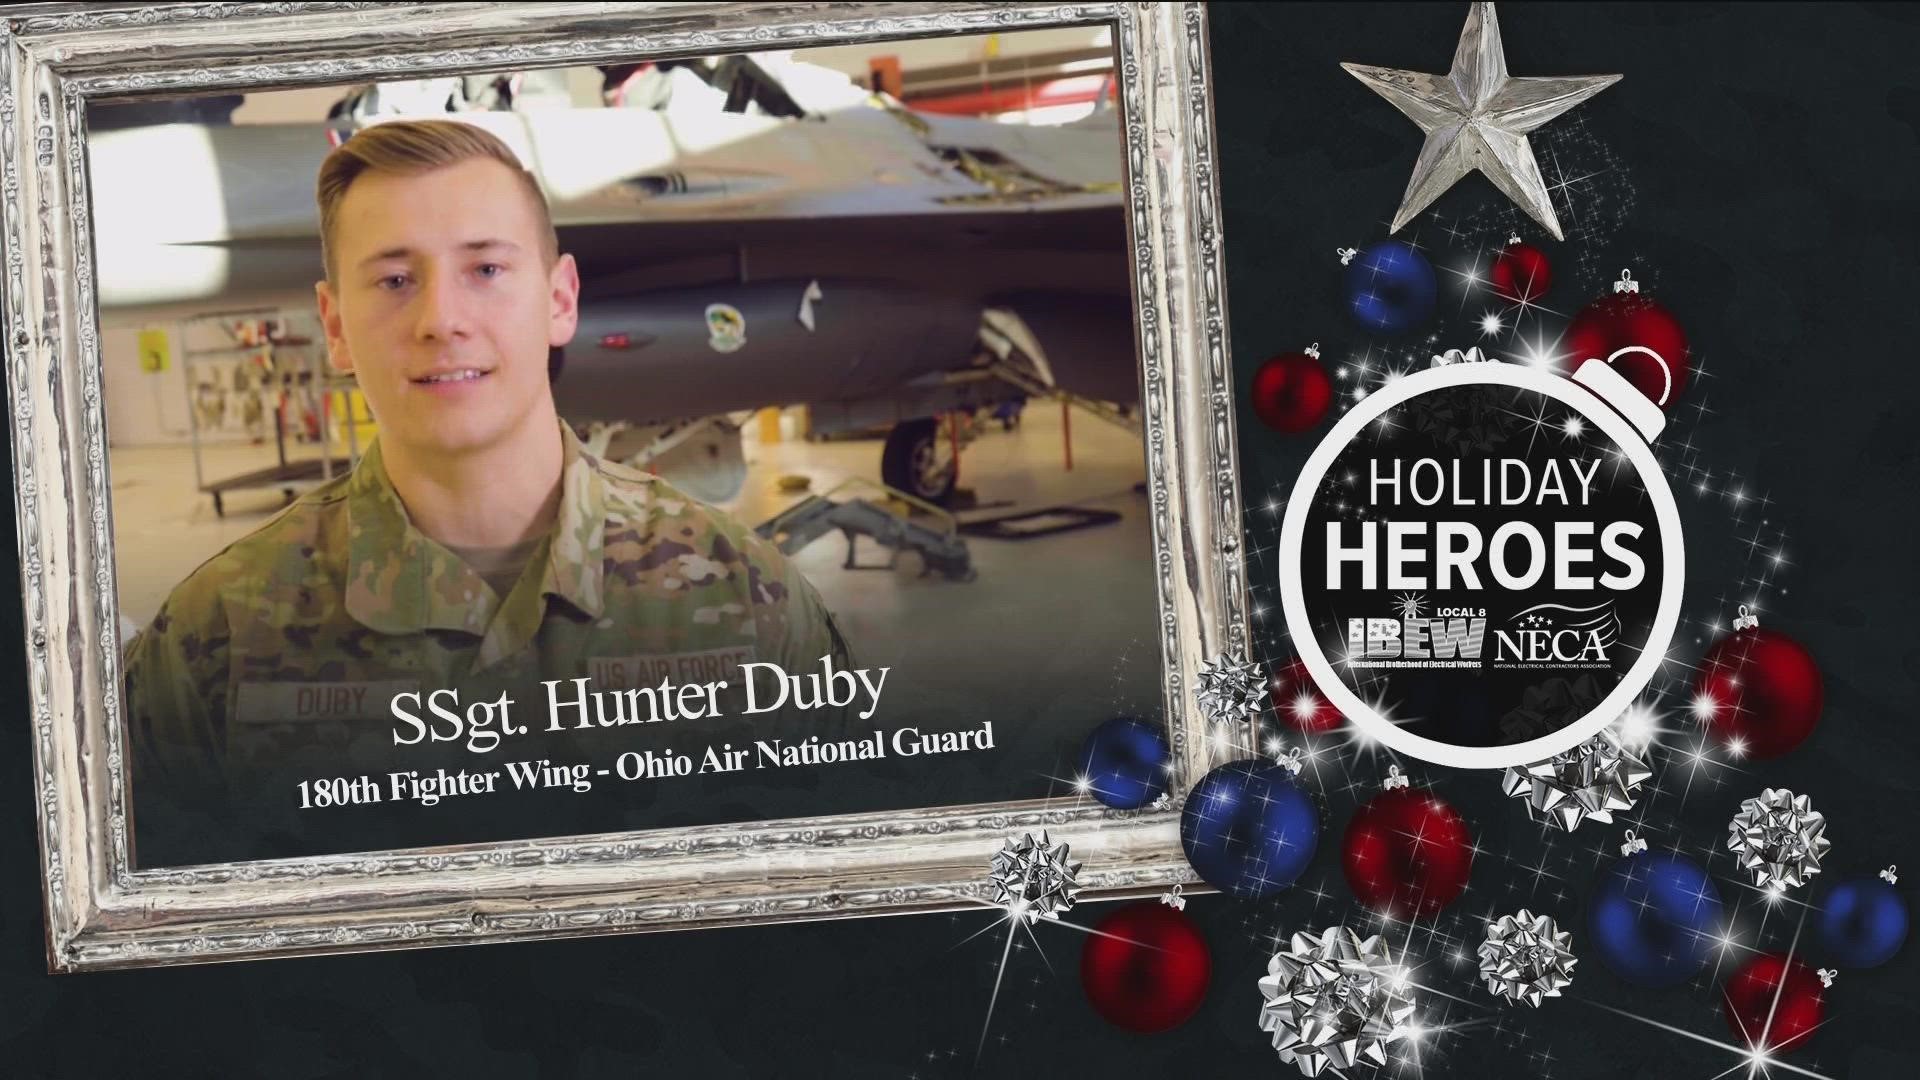 We're highlighting some of our holiday heroes. SSgt. Hunter Duby with the 180th Fighter Wing sends his appreciation to his family and friends this Christmas season.